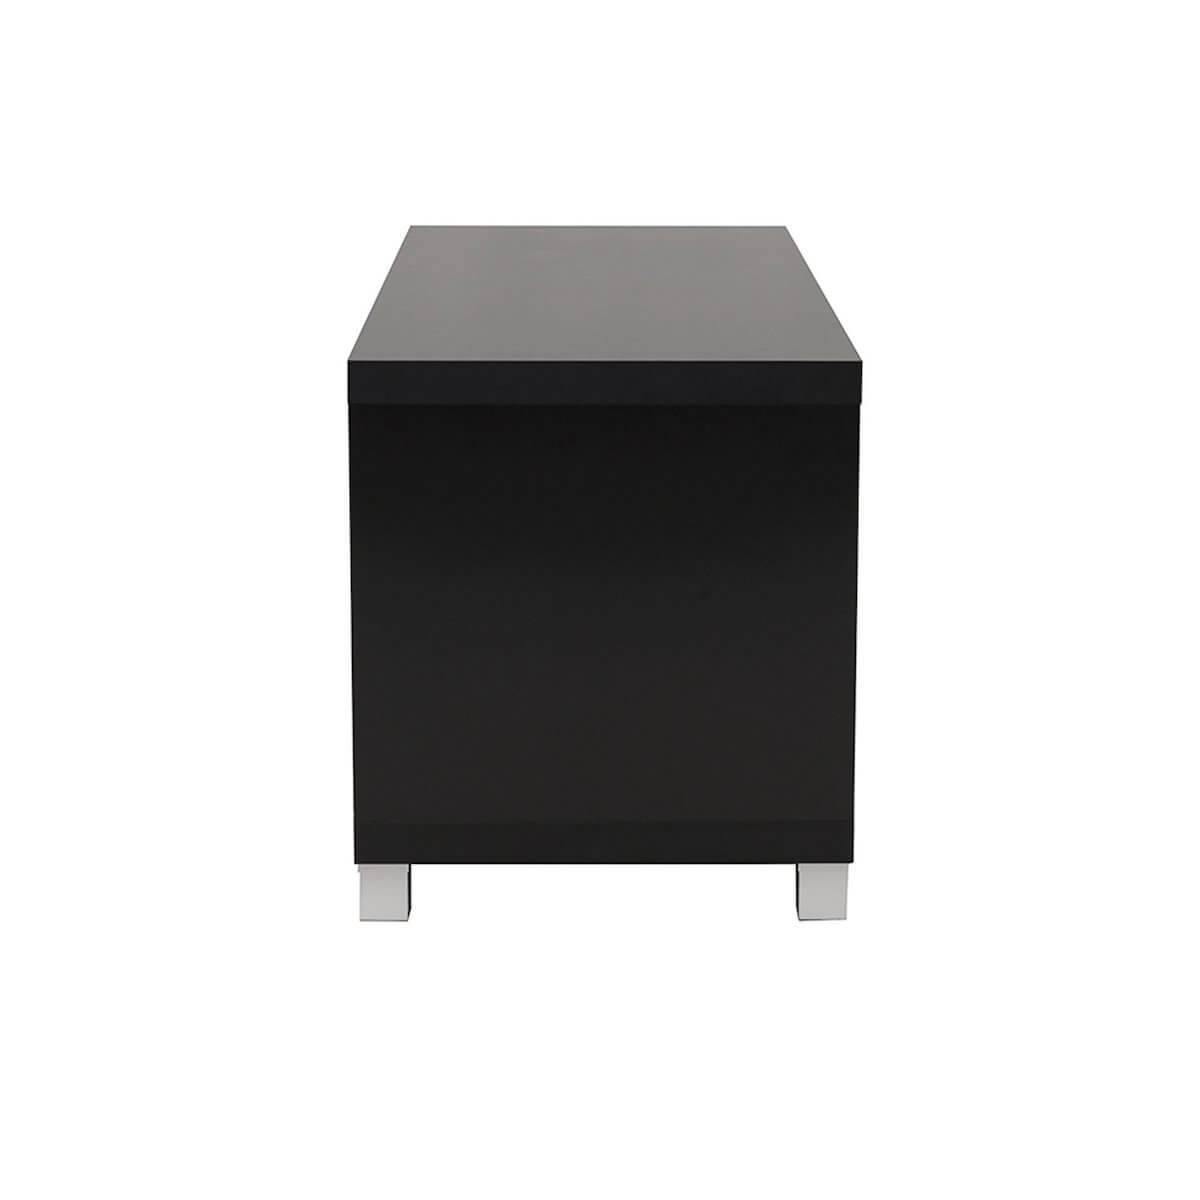 Techni Mobili Black Modern TV Stand with Storage for TVs Up To 40" RTA-8896-BK Side